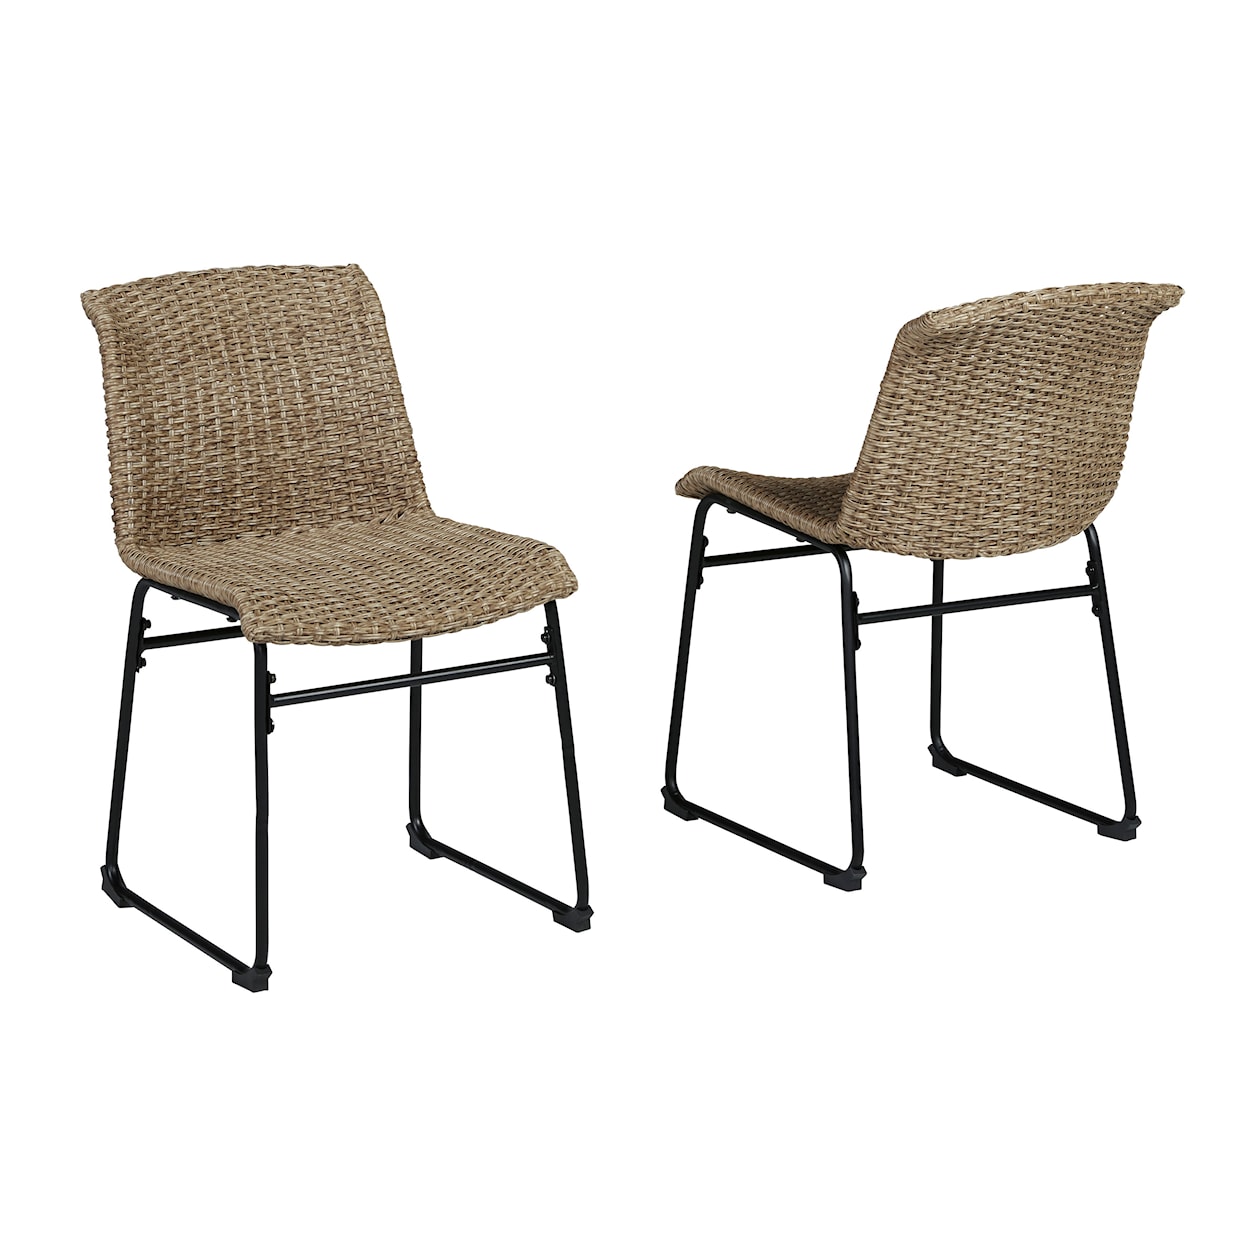 Benchcraft Amaris Set of 2 Outdoor Dining Chairs